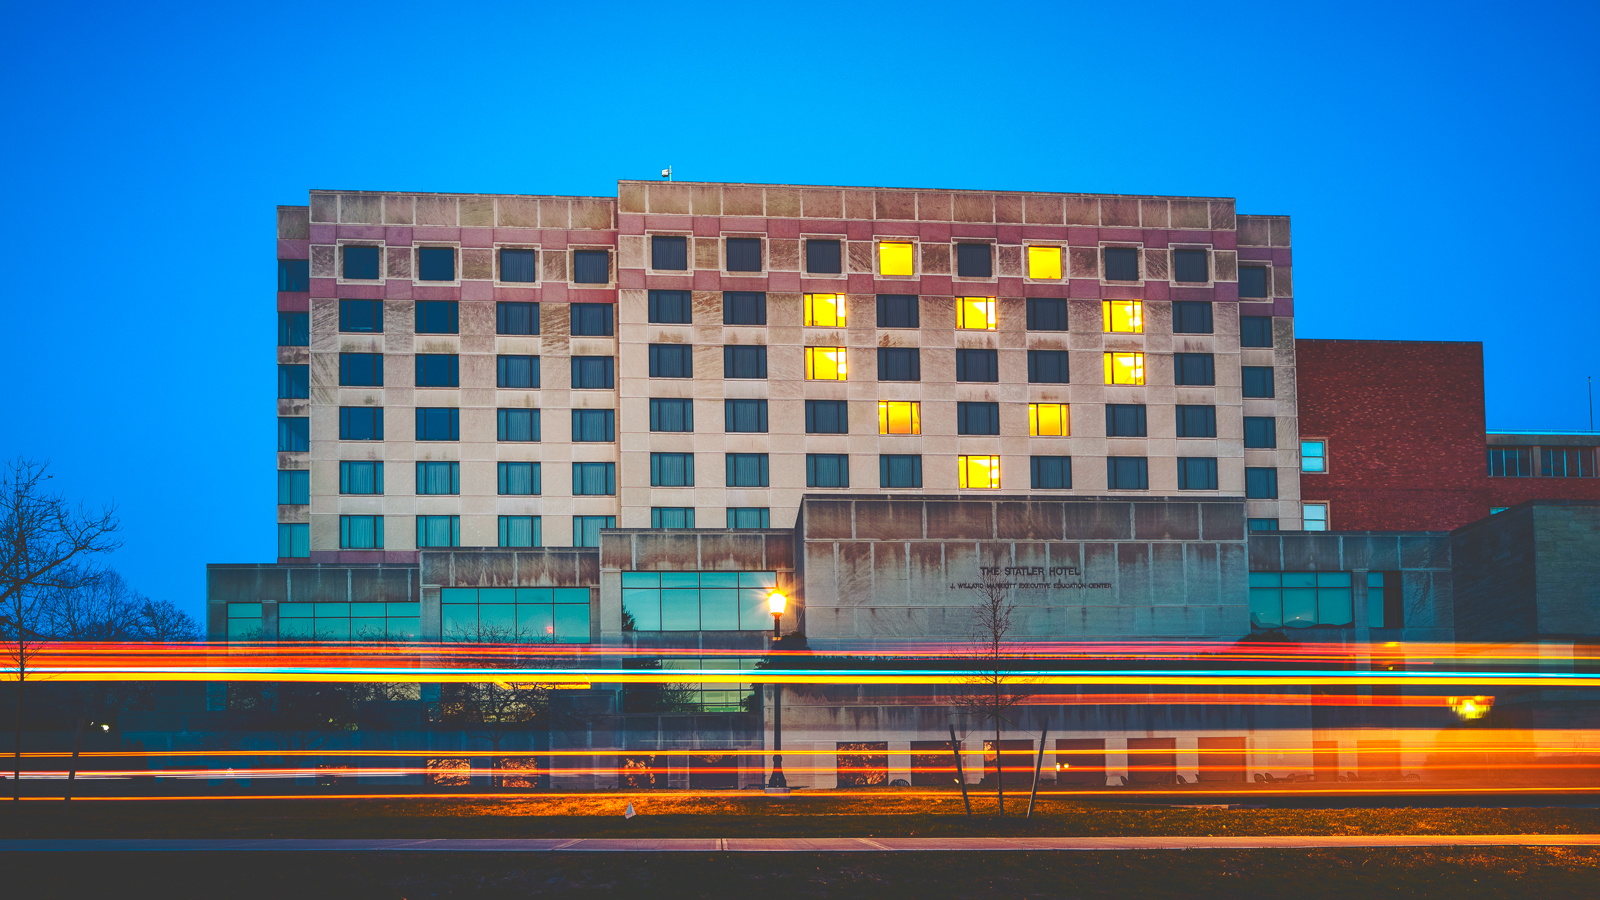 The Statler Hotel lit windows to form a heart shape when the pandemic hit and shut down operations